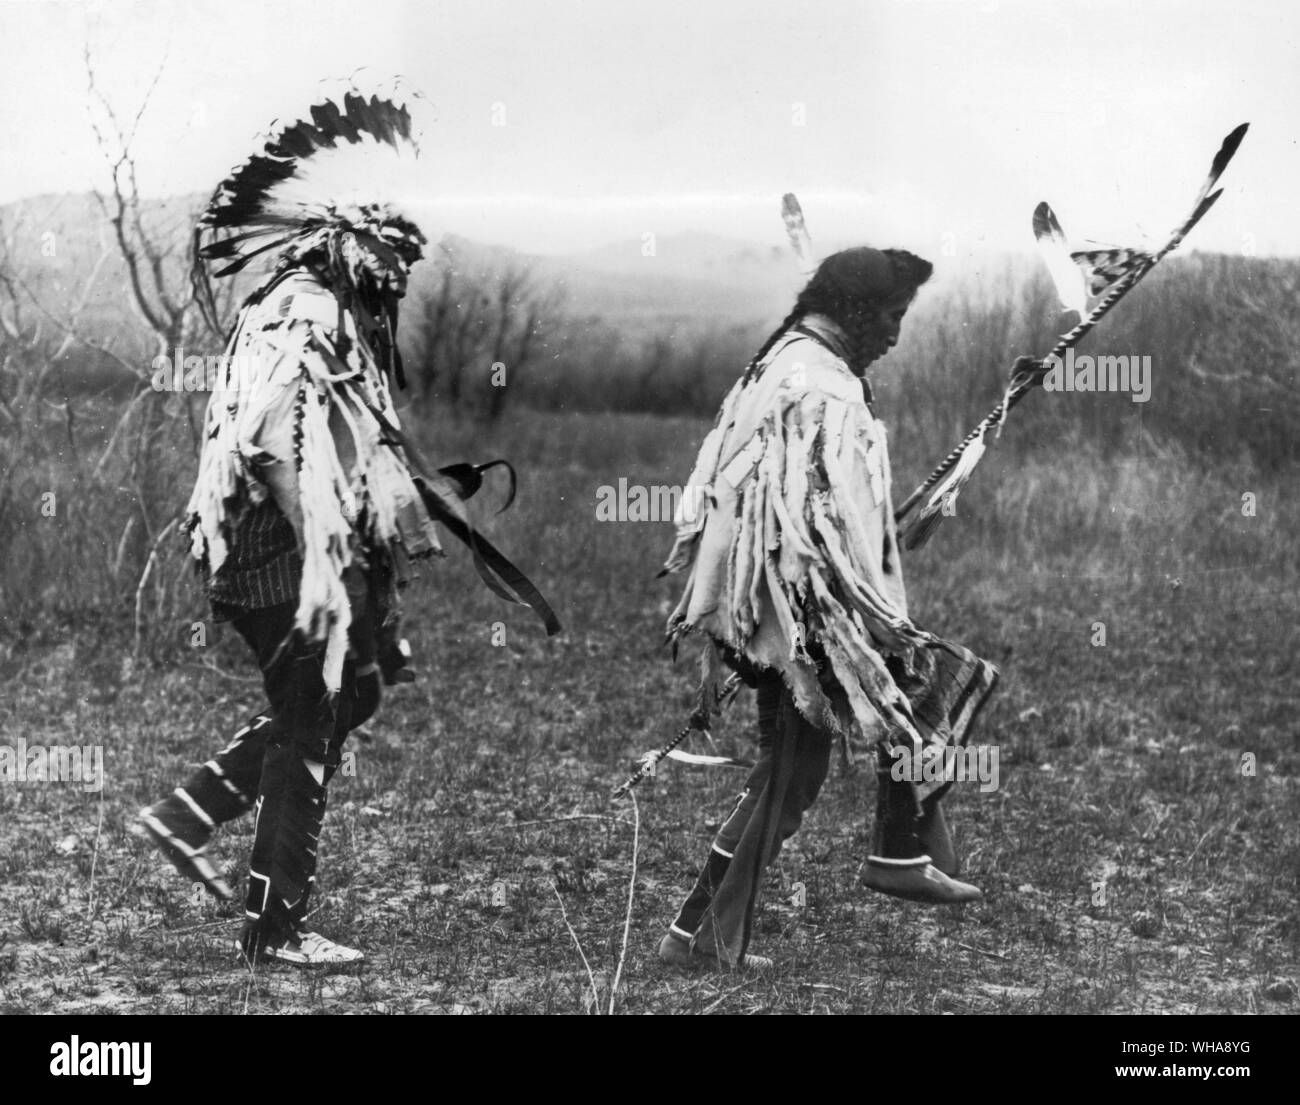 View of Chief Medicine Crow leading the dance. Crow. Montana. Medicine Crow was a warrior from the time he first went on the warpath at the age of fifteen until his last battle in 1877. He attained chieftaincy about 1870 at the age of twenty-two, and from then on he set the pace for aspiring young warriors of his people. Until his death in 1920, at the age of seventy-two, he was a reservation chief, concerned with helping the Crow tribe learn to live in the ways of the white man as soon and as efficiently as possible. He went to see the Great Father in Washington many times on behalf of his Stock Photo